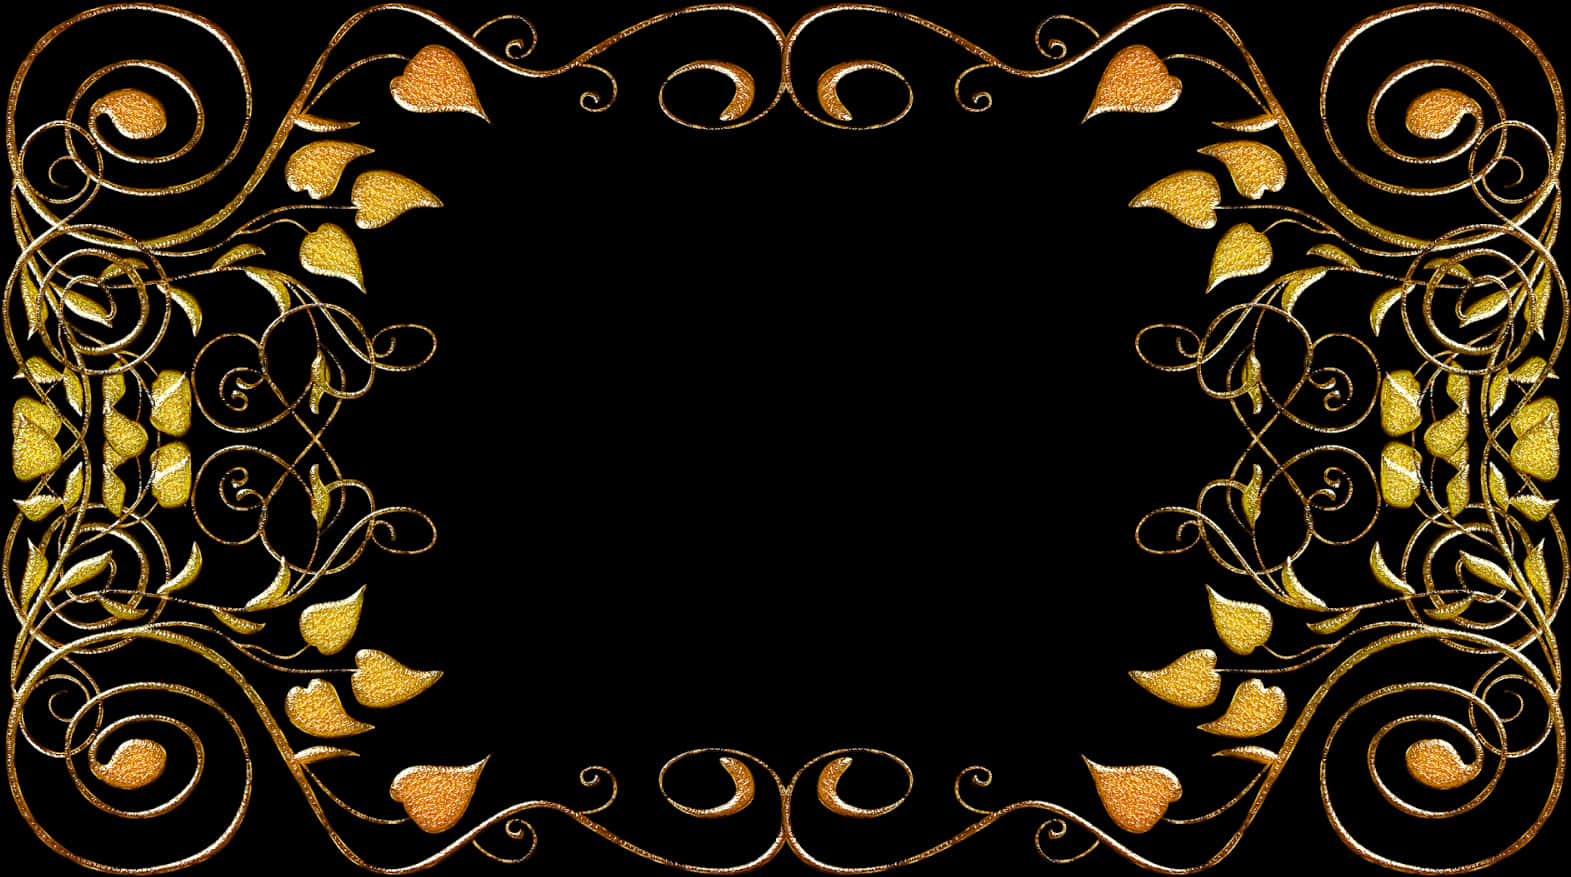 A Black Background With Gold Leaves And Swirls